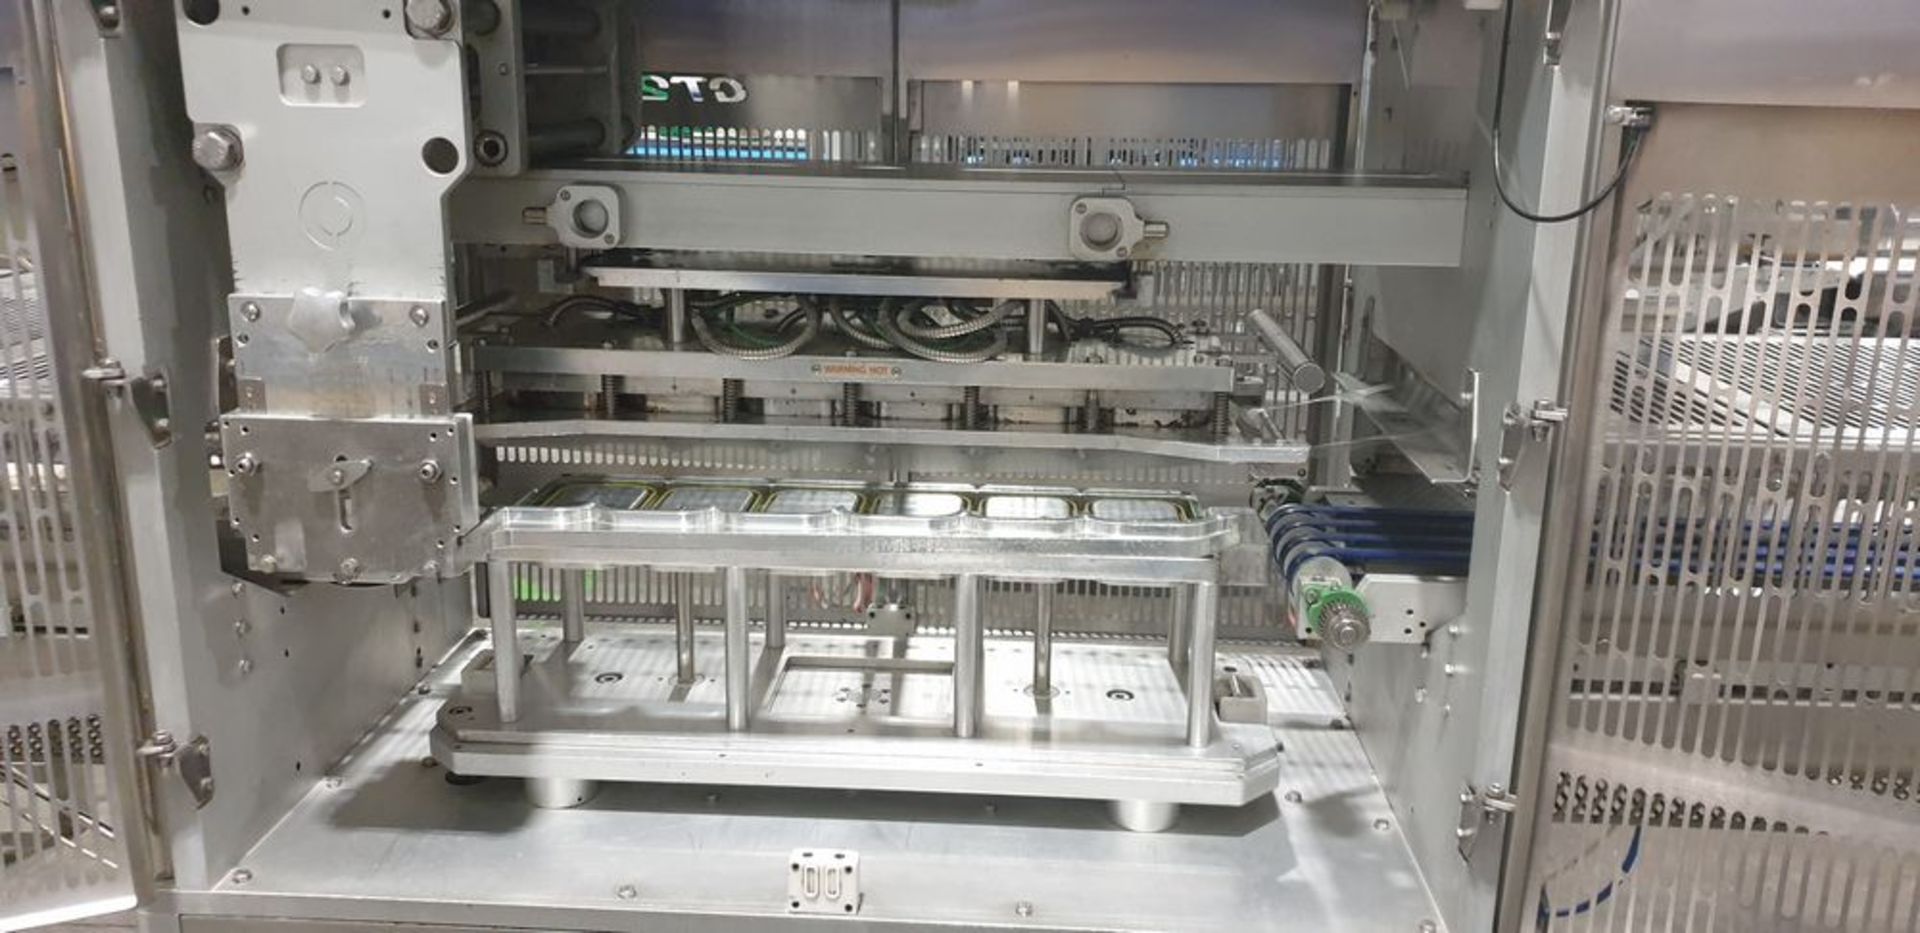 1: Proseal GT2 eSealing Machine with tooling shown - Image 6 of 6